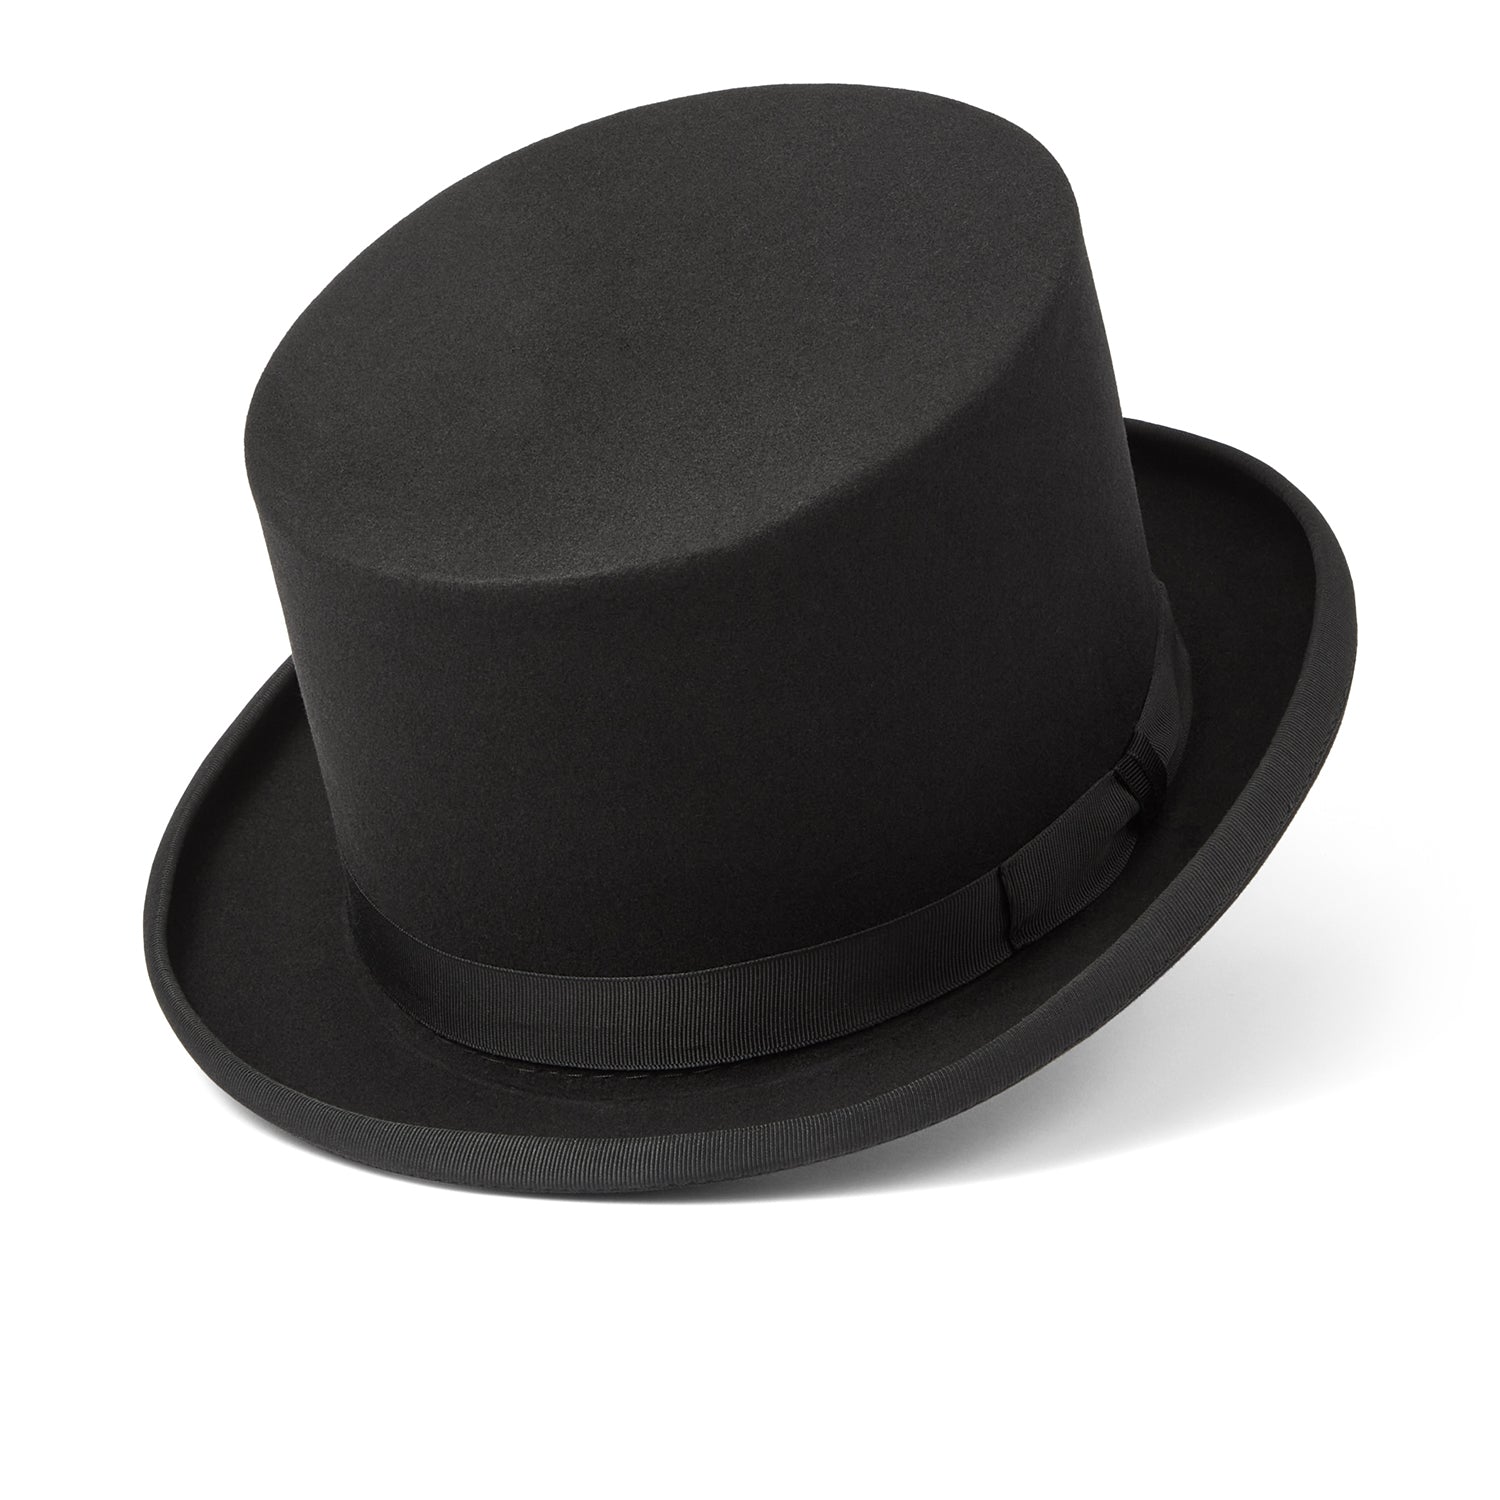 The James Bond Oddjob Bowler Hat - Goldfinger Edition - by Lock & Co.